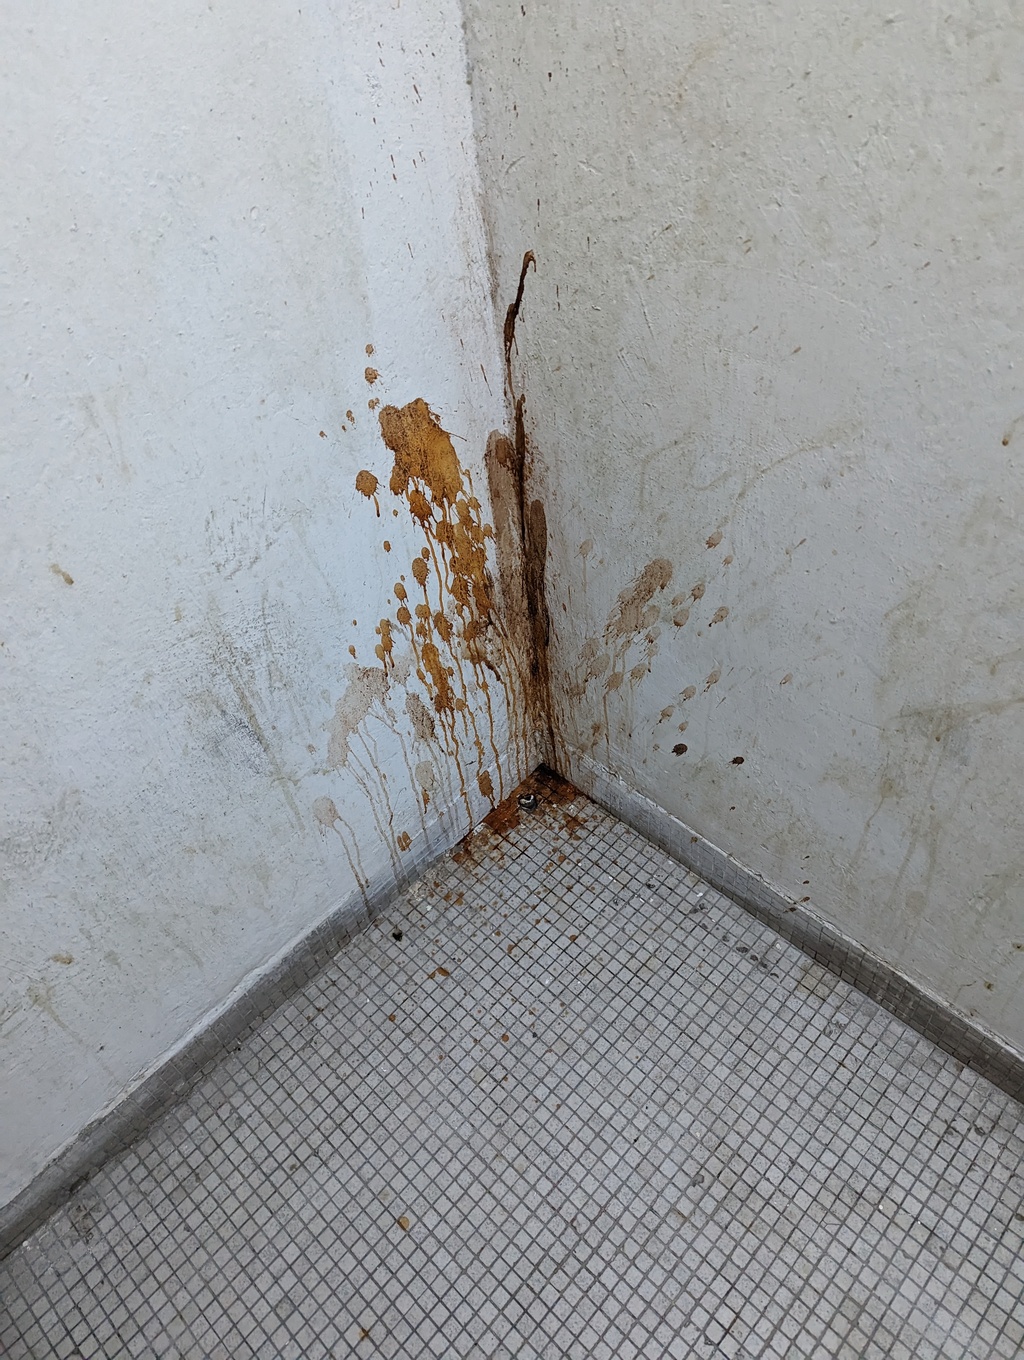 The lifts were slow and crowded, and besides, if you didn't take the stairs, you'd miss the... stains in the corners.